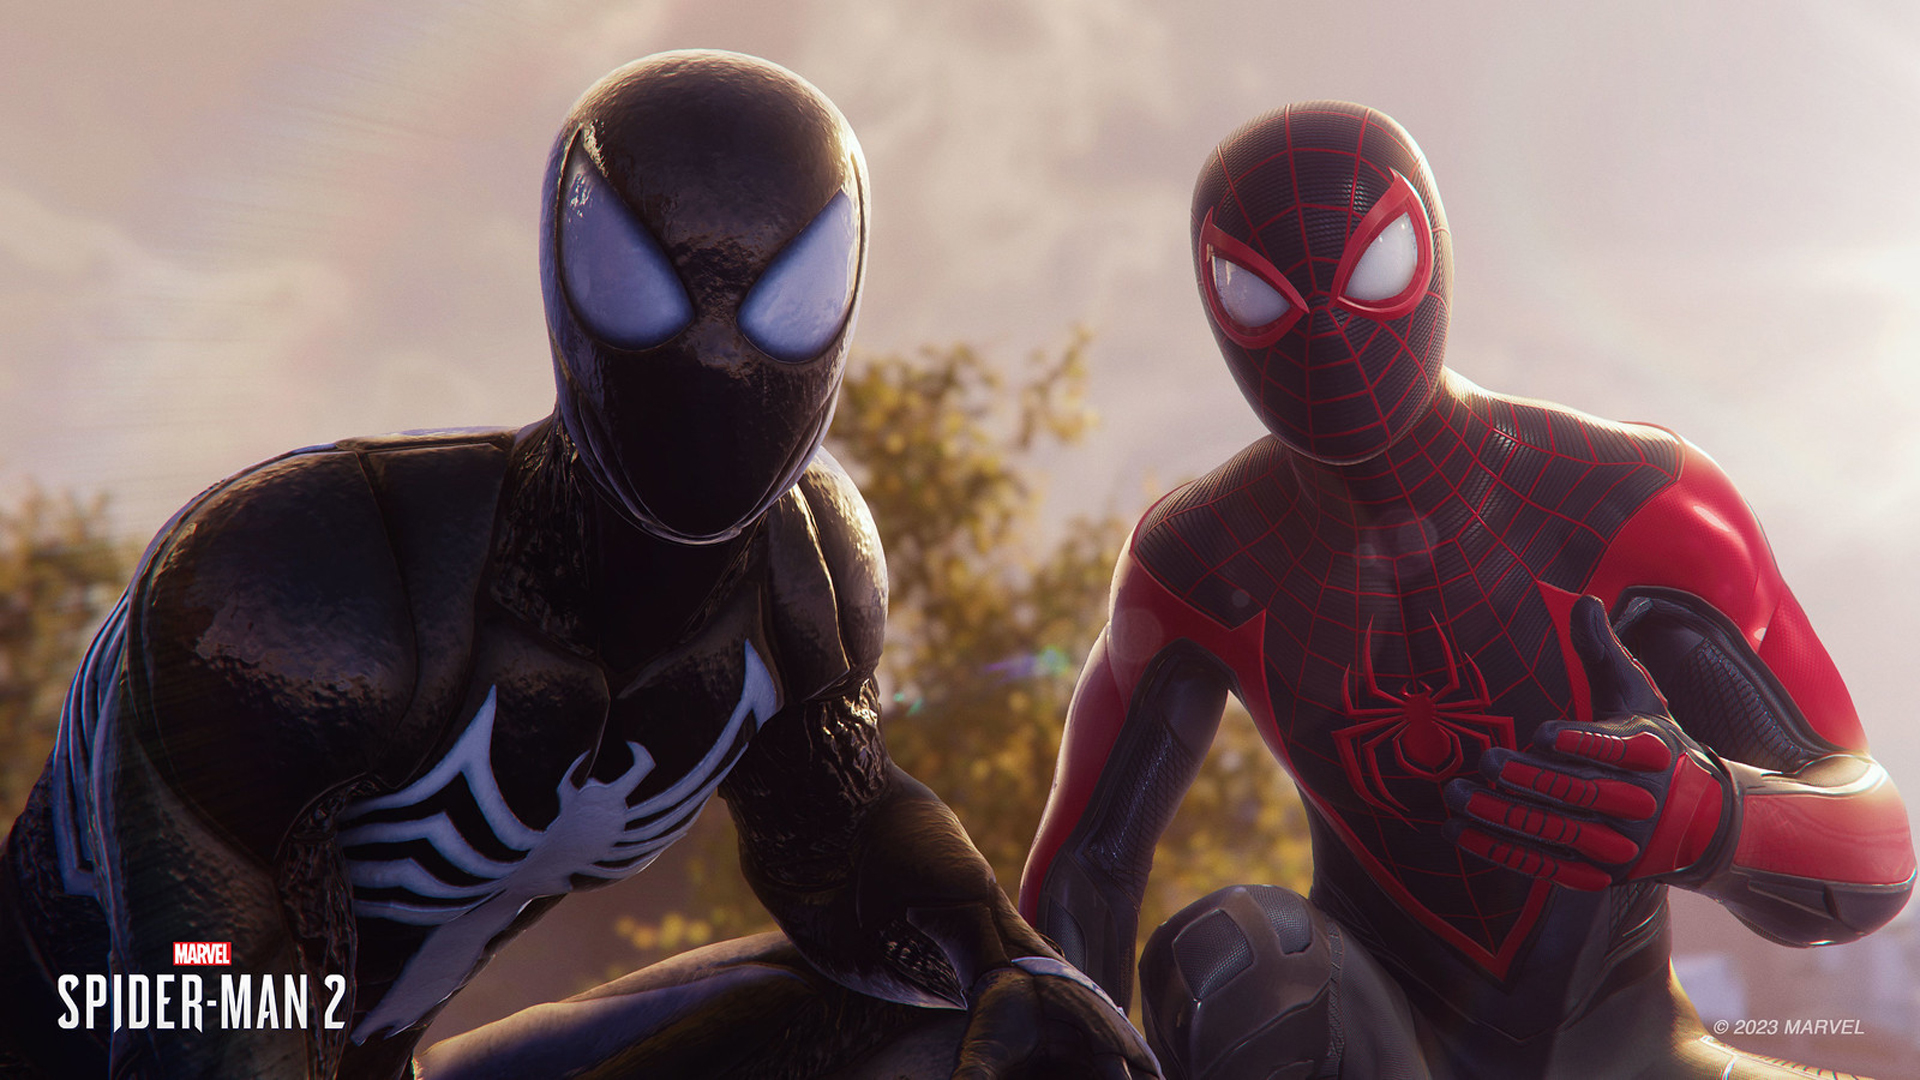 Marvel’s Spider-Man 2 will feature 3 Spidey skill trees